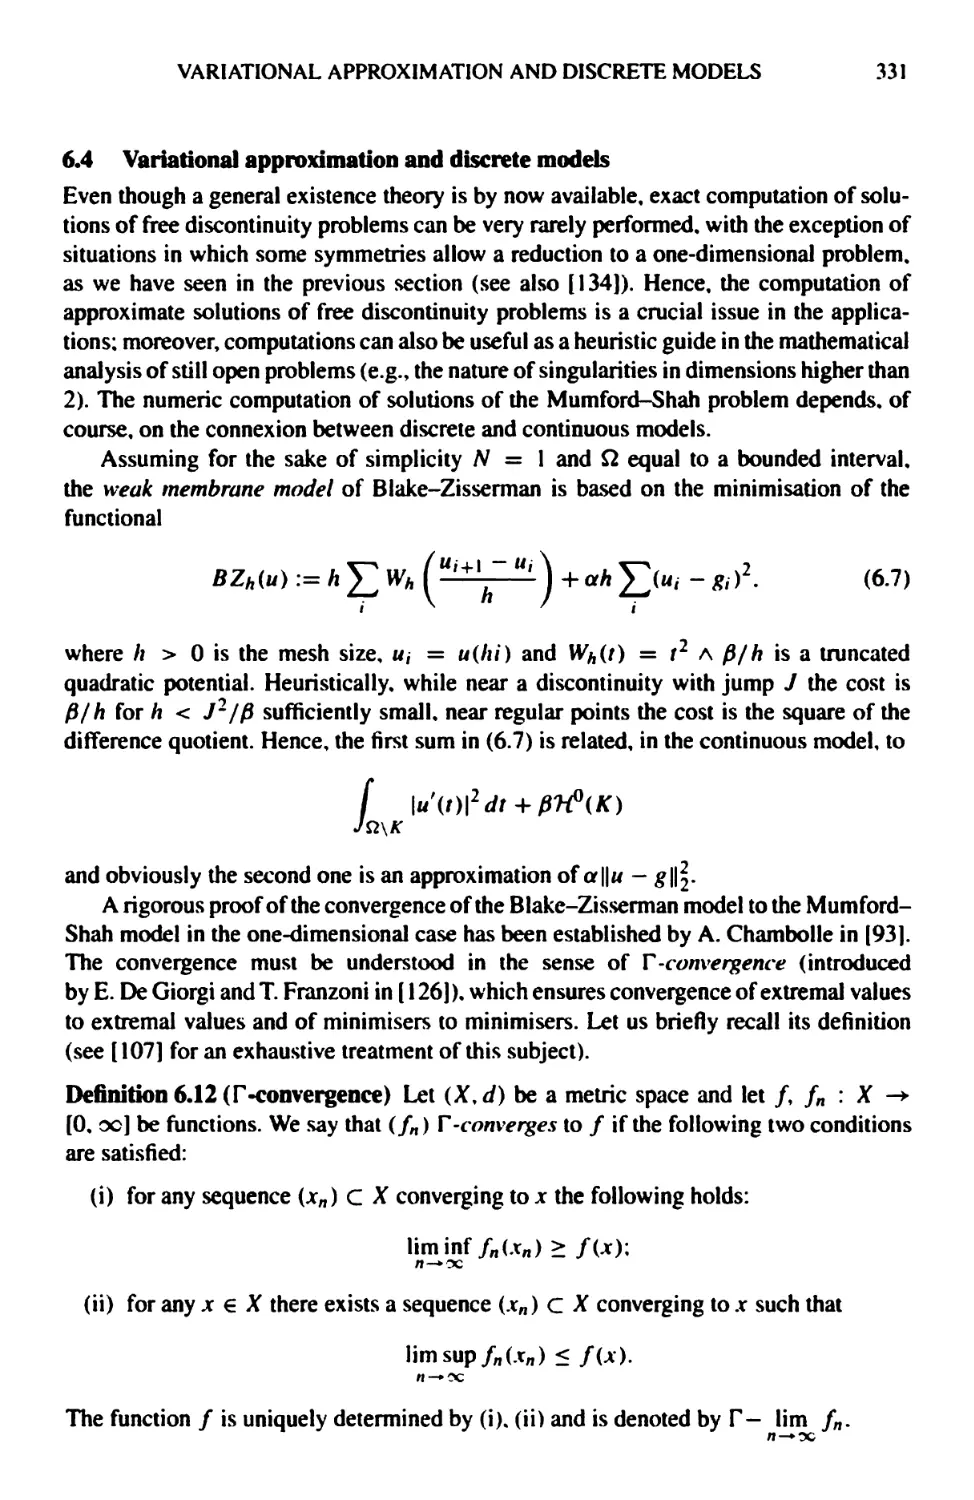 6.4 Variational approximation and discrete models